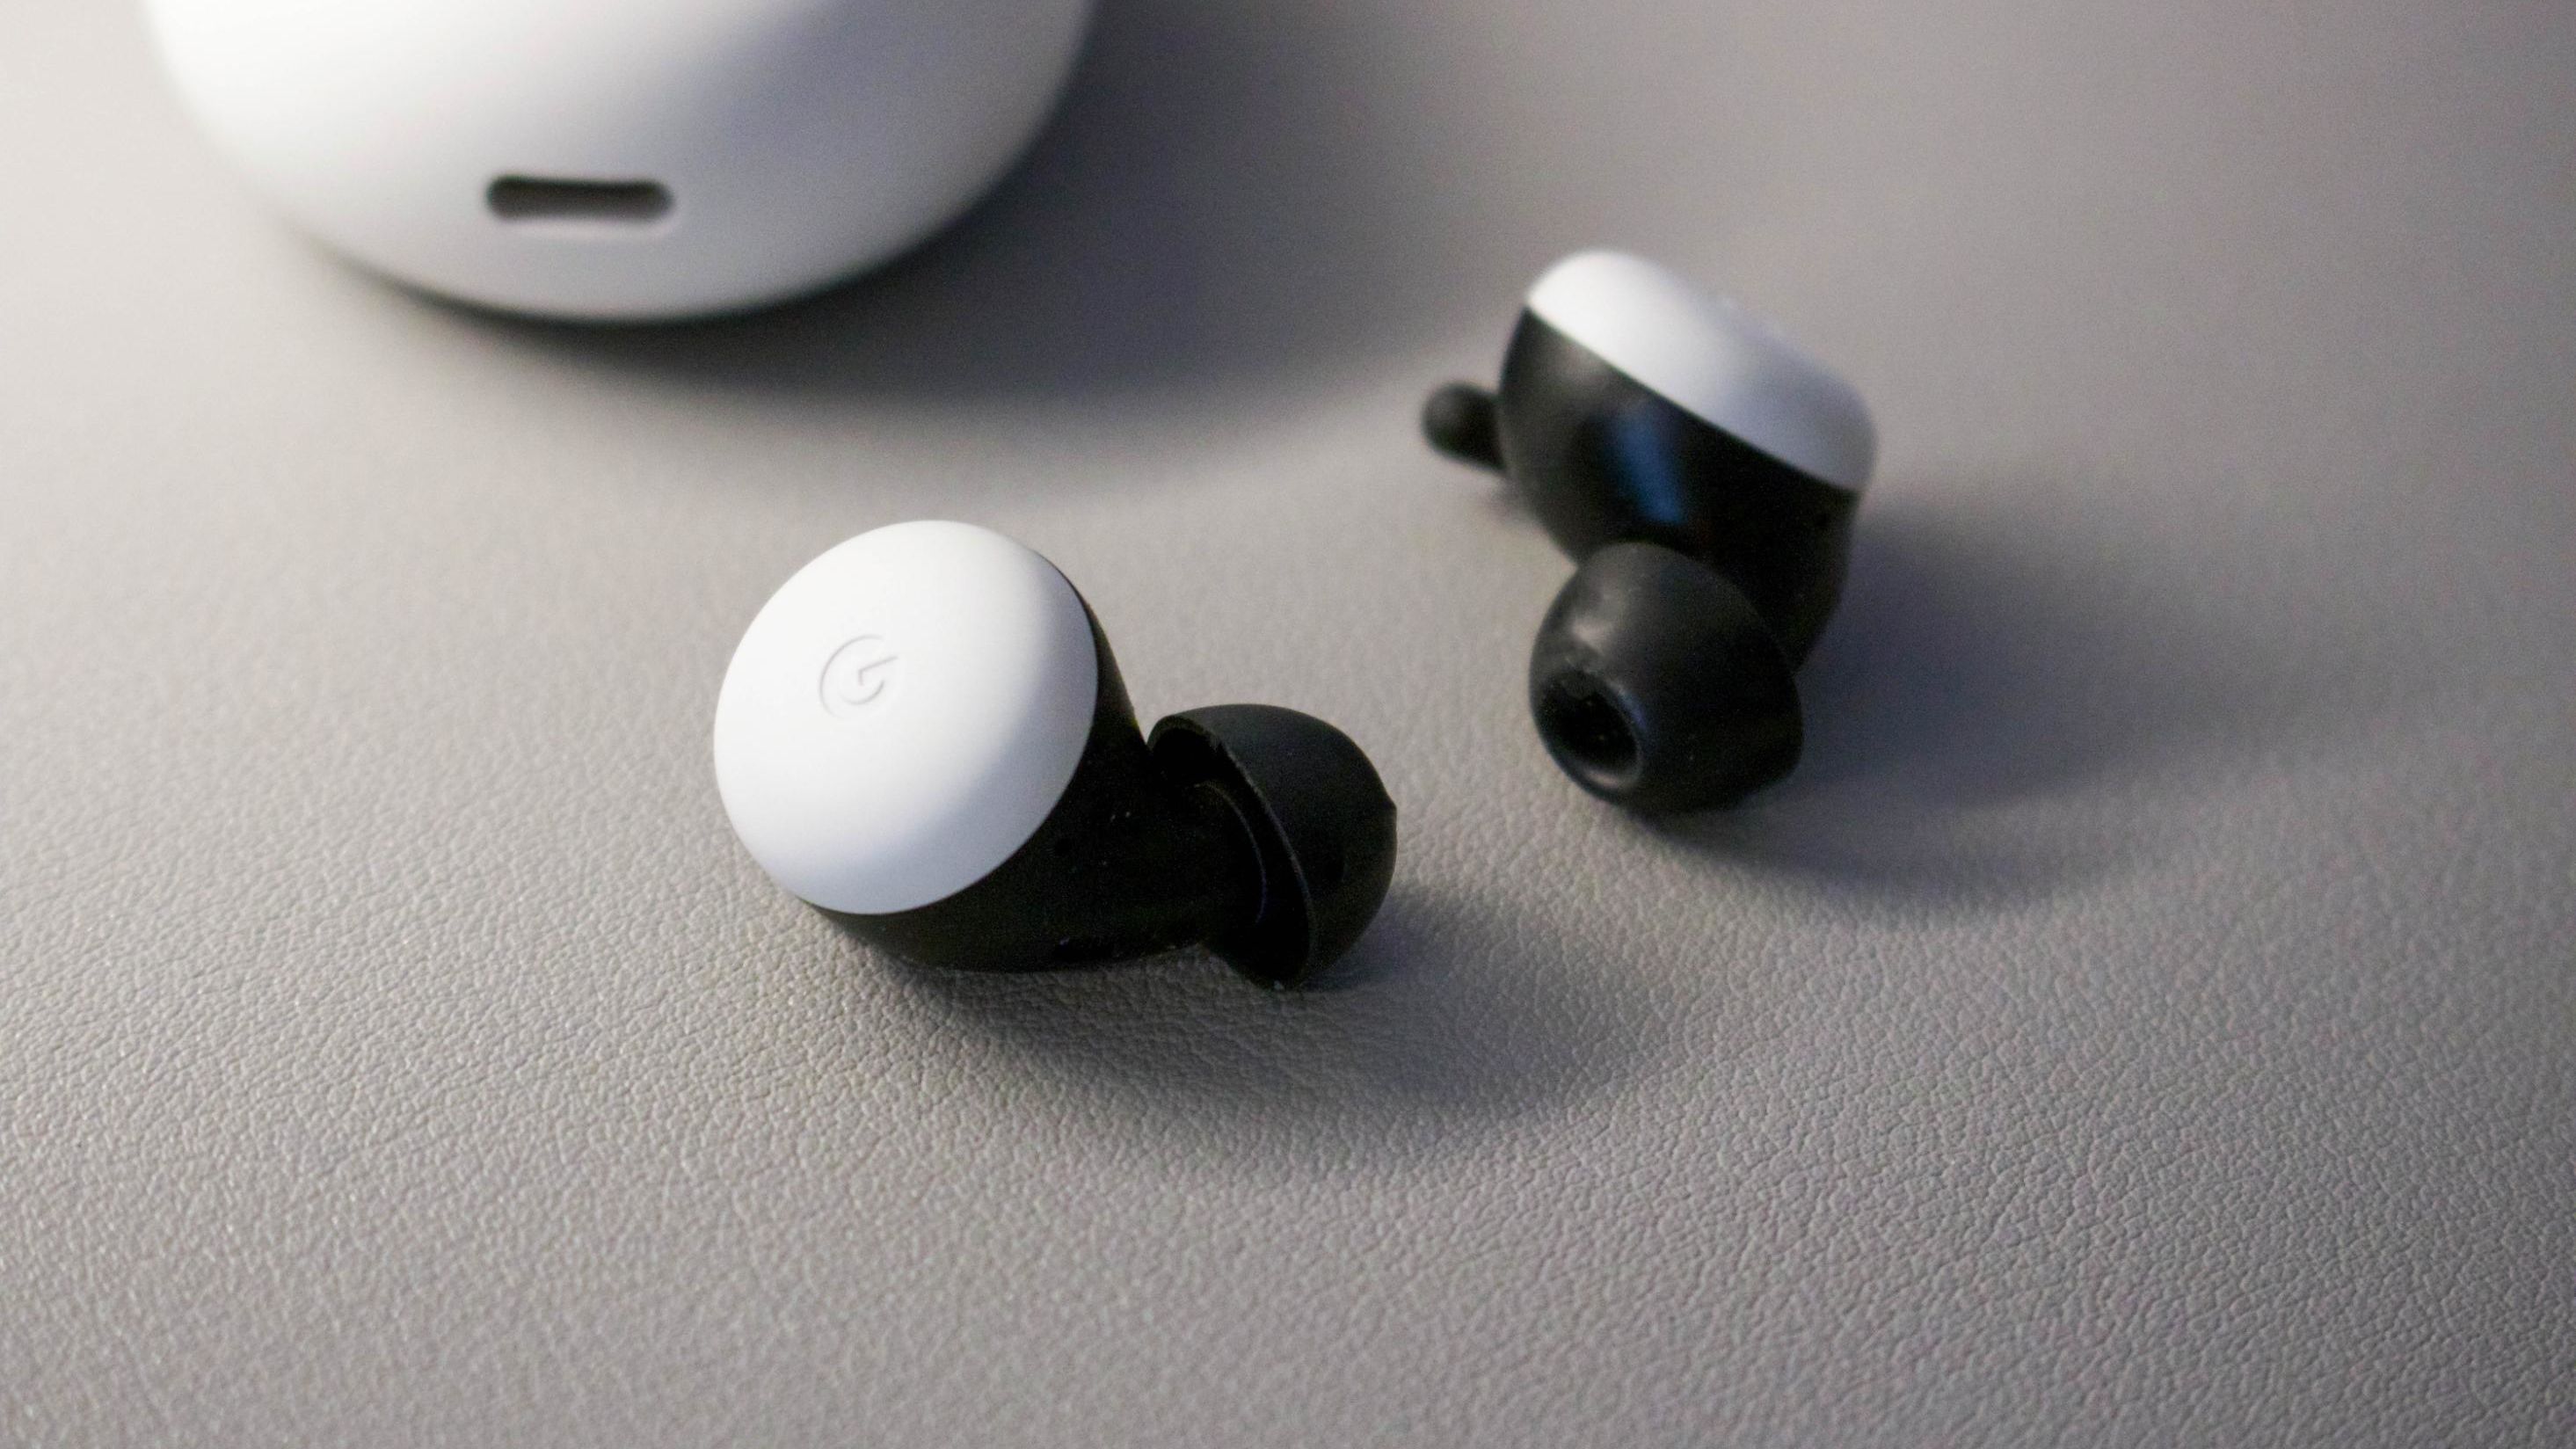 Conversation Detection: Five features coming on Google Pixel Buds Pro  earphones - Times of India